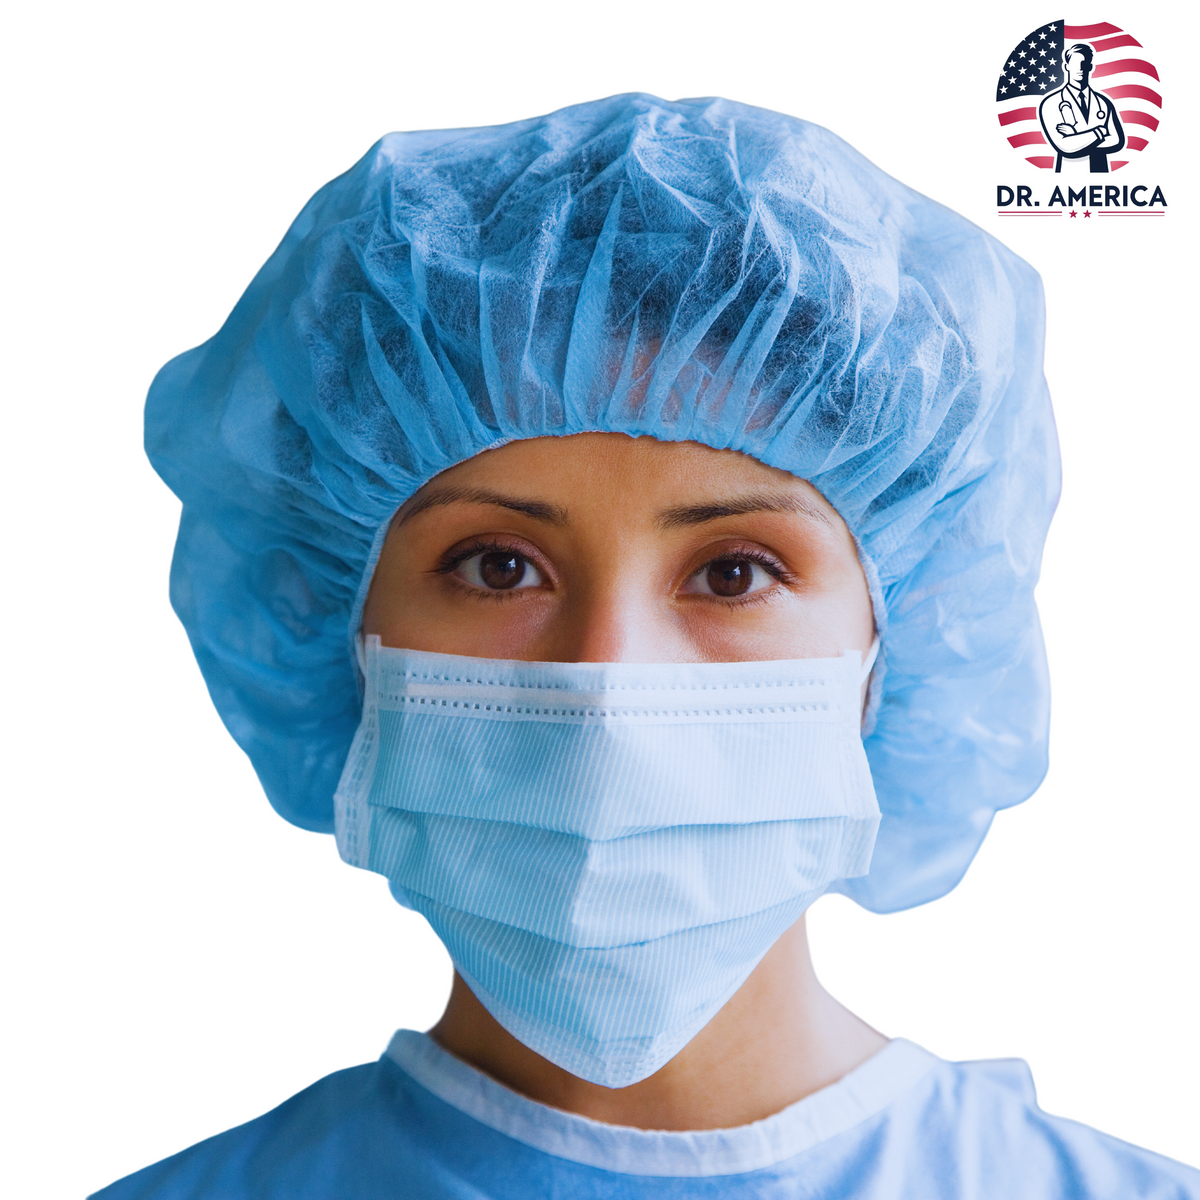 Surgical Head Caps, Disposable, Elastic Backing for Secure Fit, Universal Size, Non Woven High Quality Protective Fabric, Industries include: Medical, Labs, Surgery centers, ICU’s & Hospitals - FDA Approved – Dr. America Healthcare